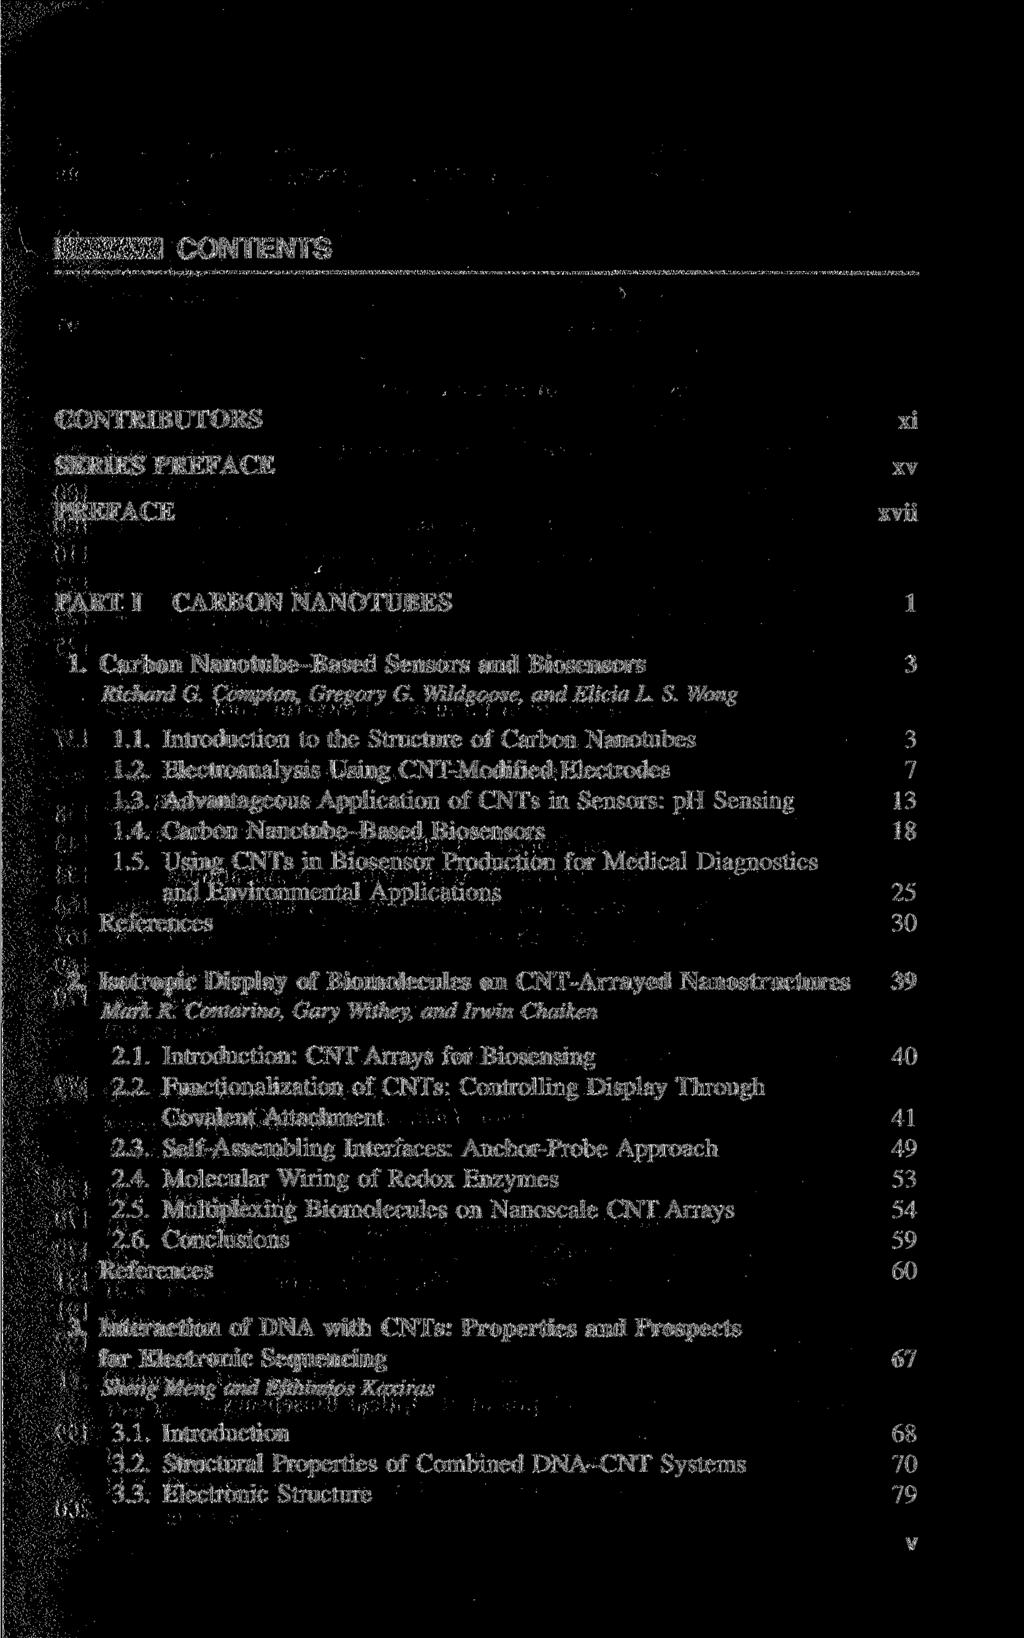 CONTENTS CONTRIBUTORS SERIES PREFACE PREFACE xi xv xvii PART I CARBON NANOTUBES 1 1. Carbon Nanotube-Based Sensors and Biosensors 3 Richard G. Compton, Gregory G. Wildgoose, and Elicia L. S. Wong 1.1. Introduction to the Structure of Carbon Nanotubes 3 1.